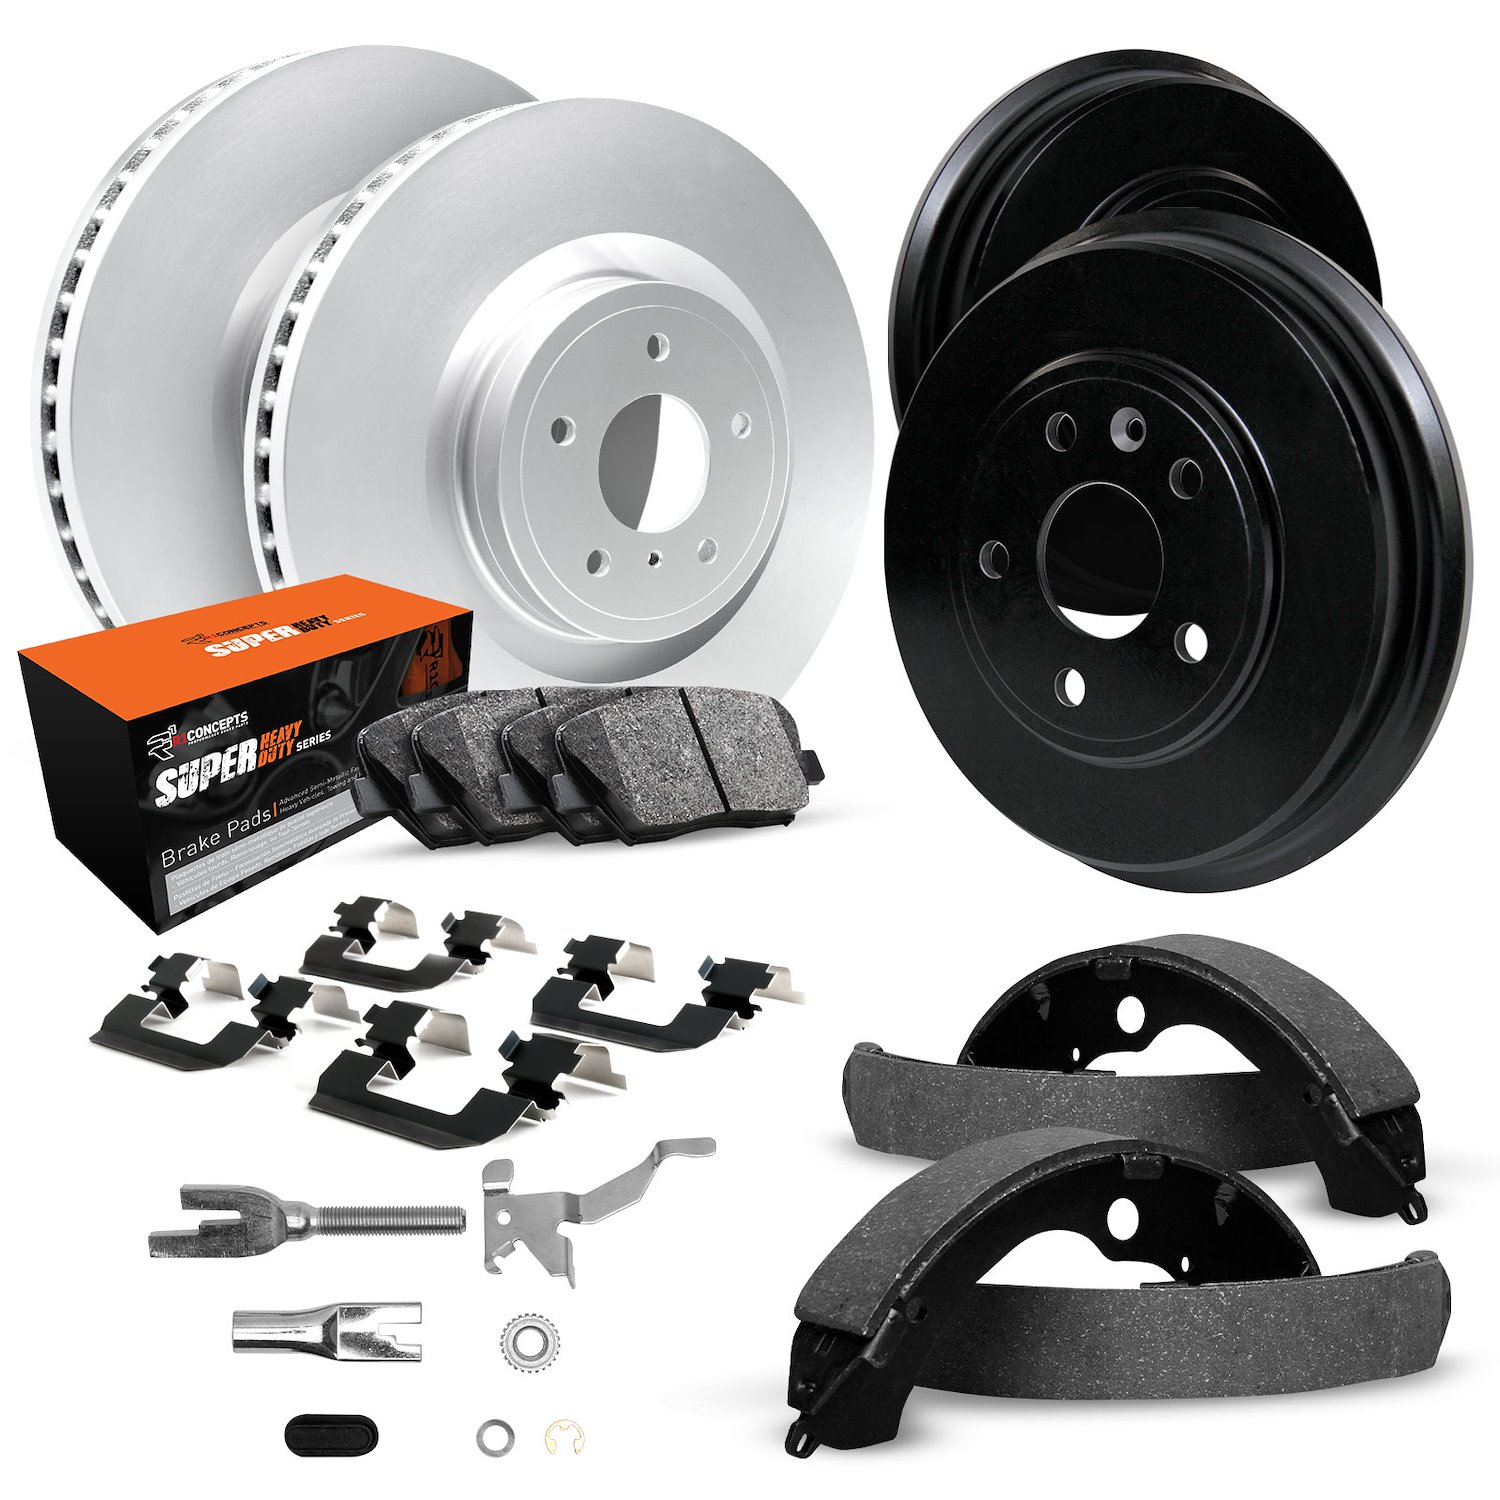 GEO-Carbon Brake Rotor & Drum Set w/Super-Duty Pads, Shoes, Hardware/Adjusters, 2003-2009 Ford/Lincoln/Mercury/Mazda